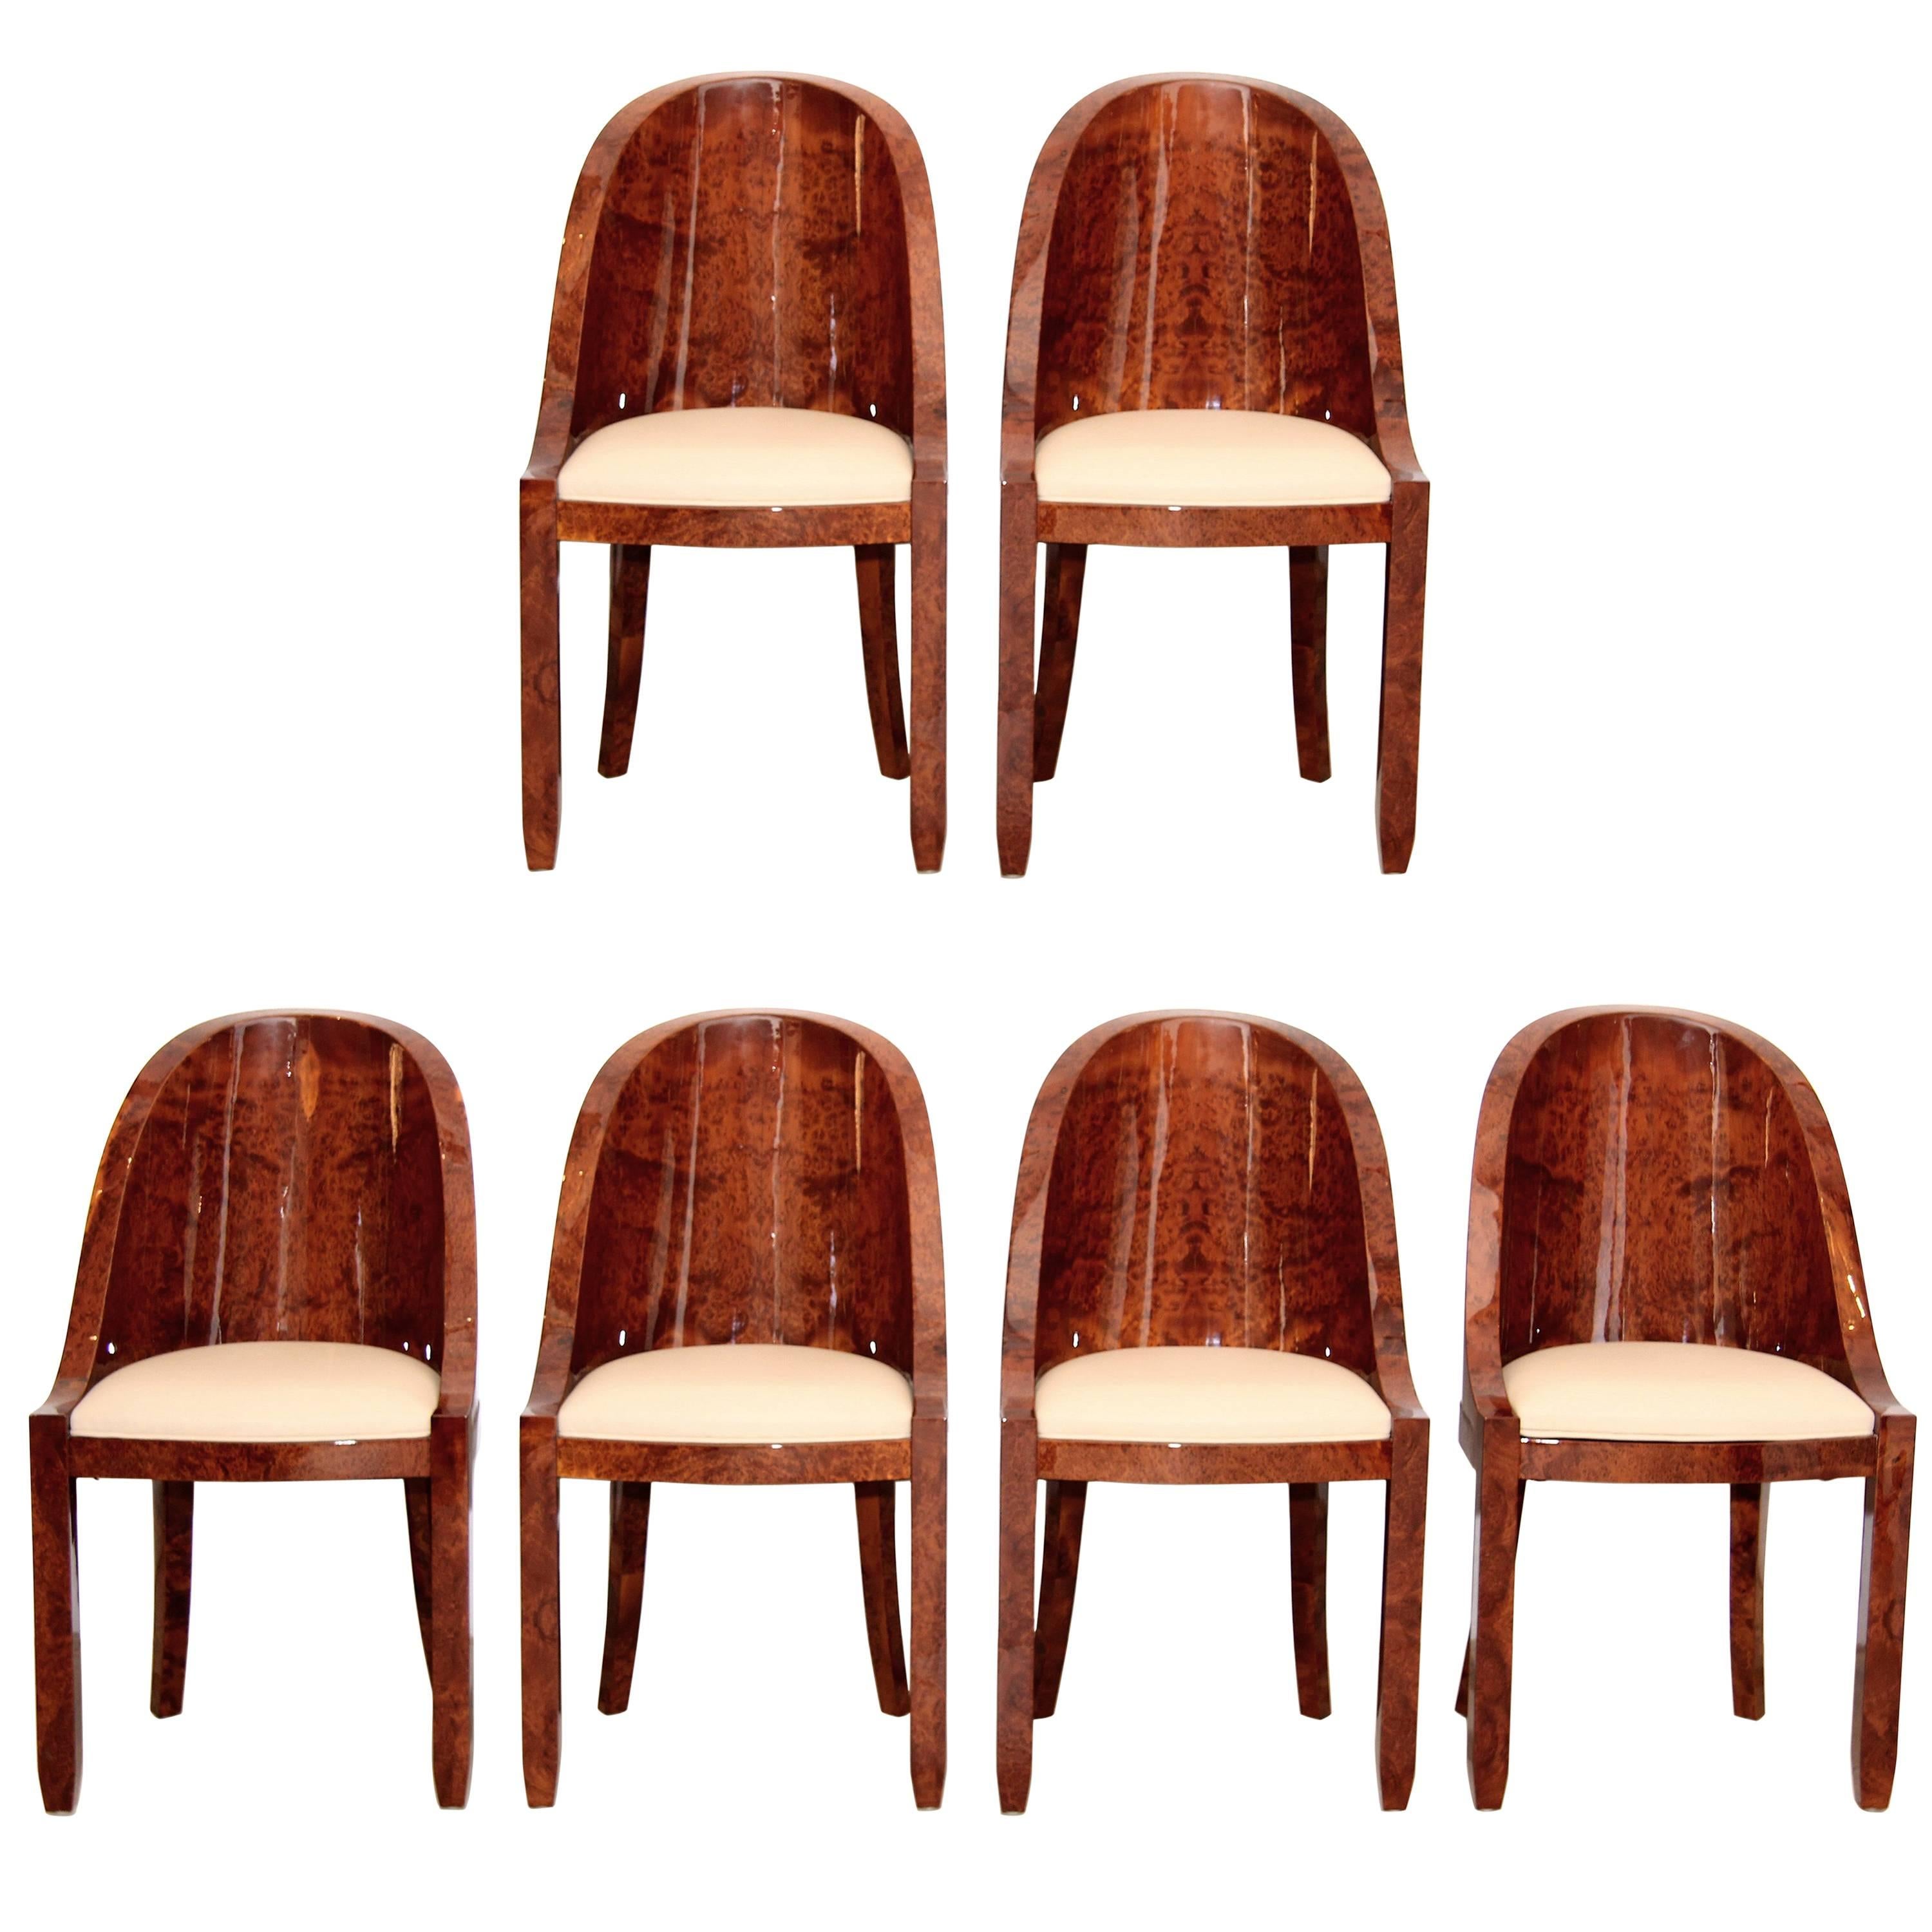 Set of Six French Art Deco Dining Chairs in Tuja Burl Wood, Re-Lacquered